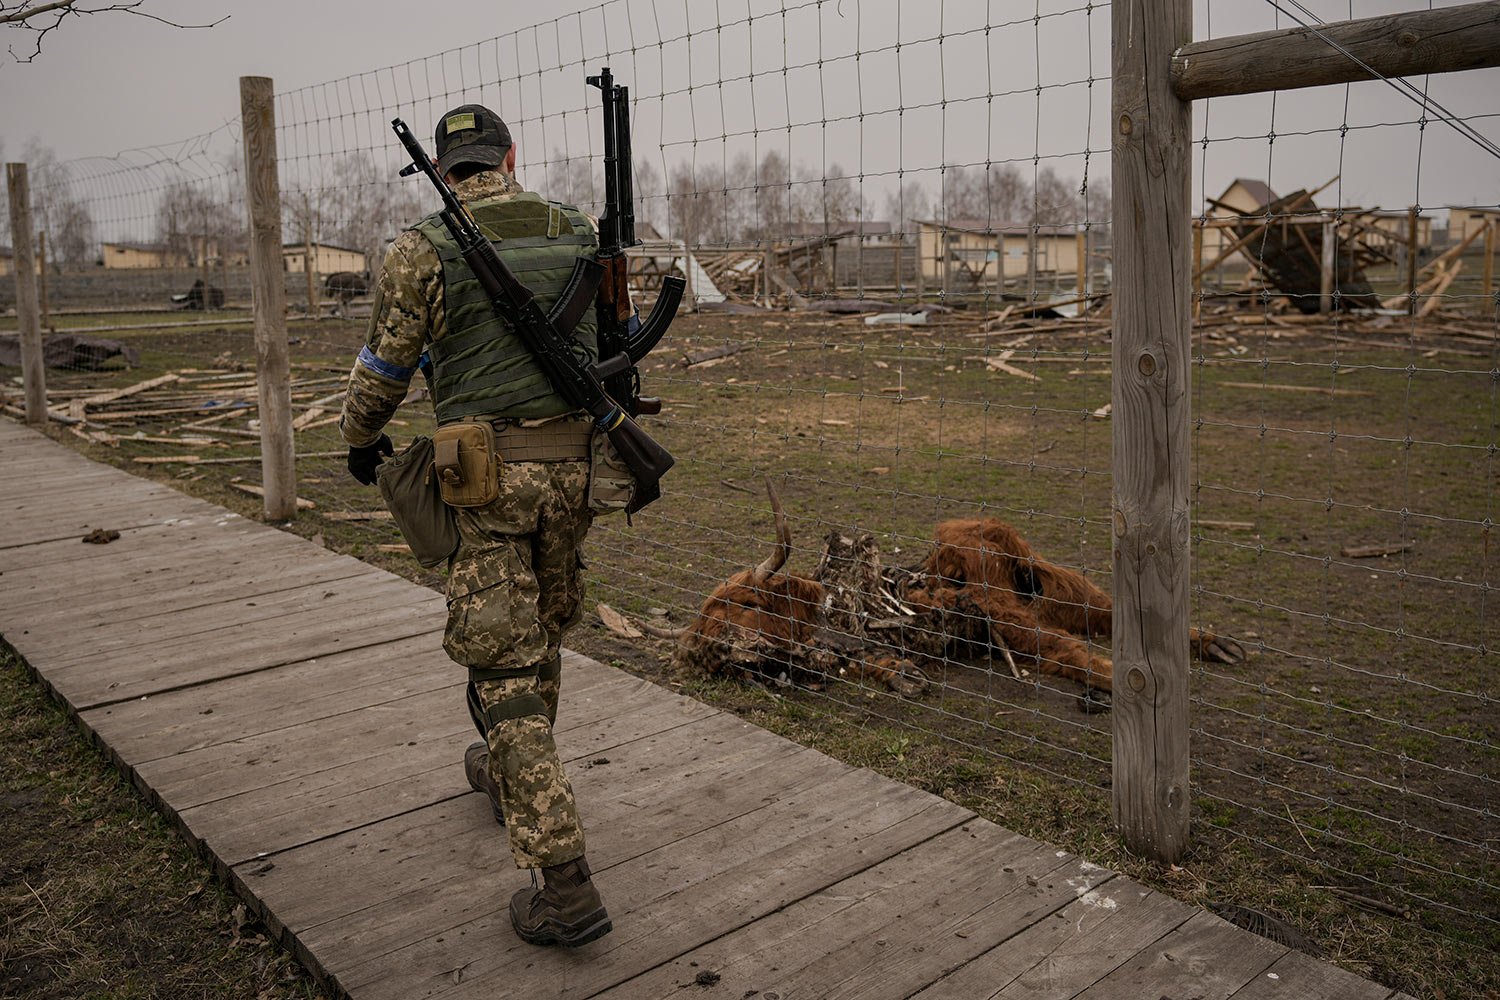  A Ukrainian serviceman walks by an animal which was killed during fighting at a heavily damaged private zoo while soldiers and volunteers attempted to evacuate the surviving animals to safety in the village of Yasnohorodka, on the outskirts of Kyiv,